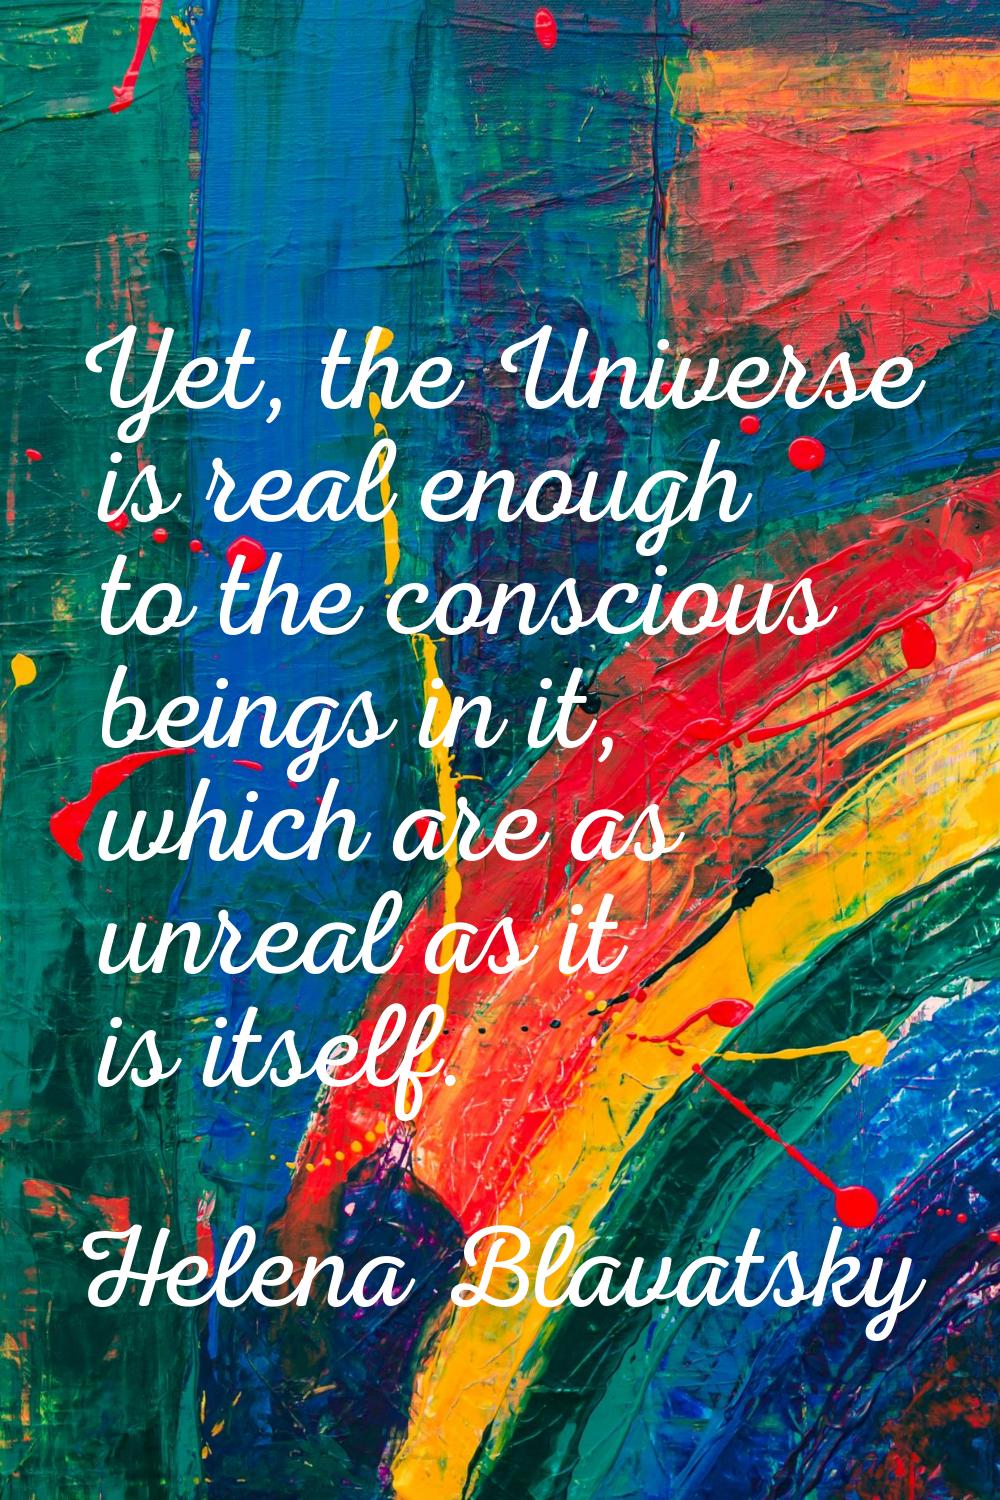 Yet, the Universe is real enough to the conscious beings in it, which are as unreal as it is itself